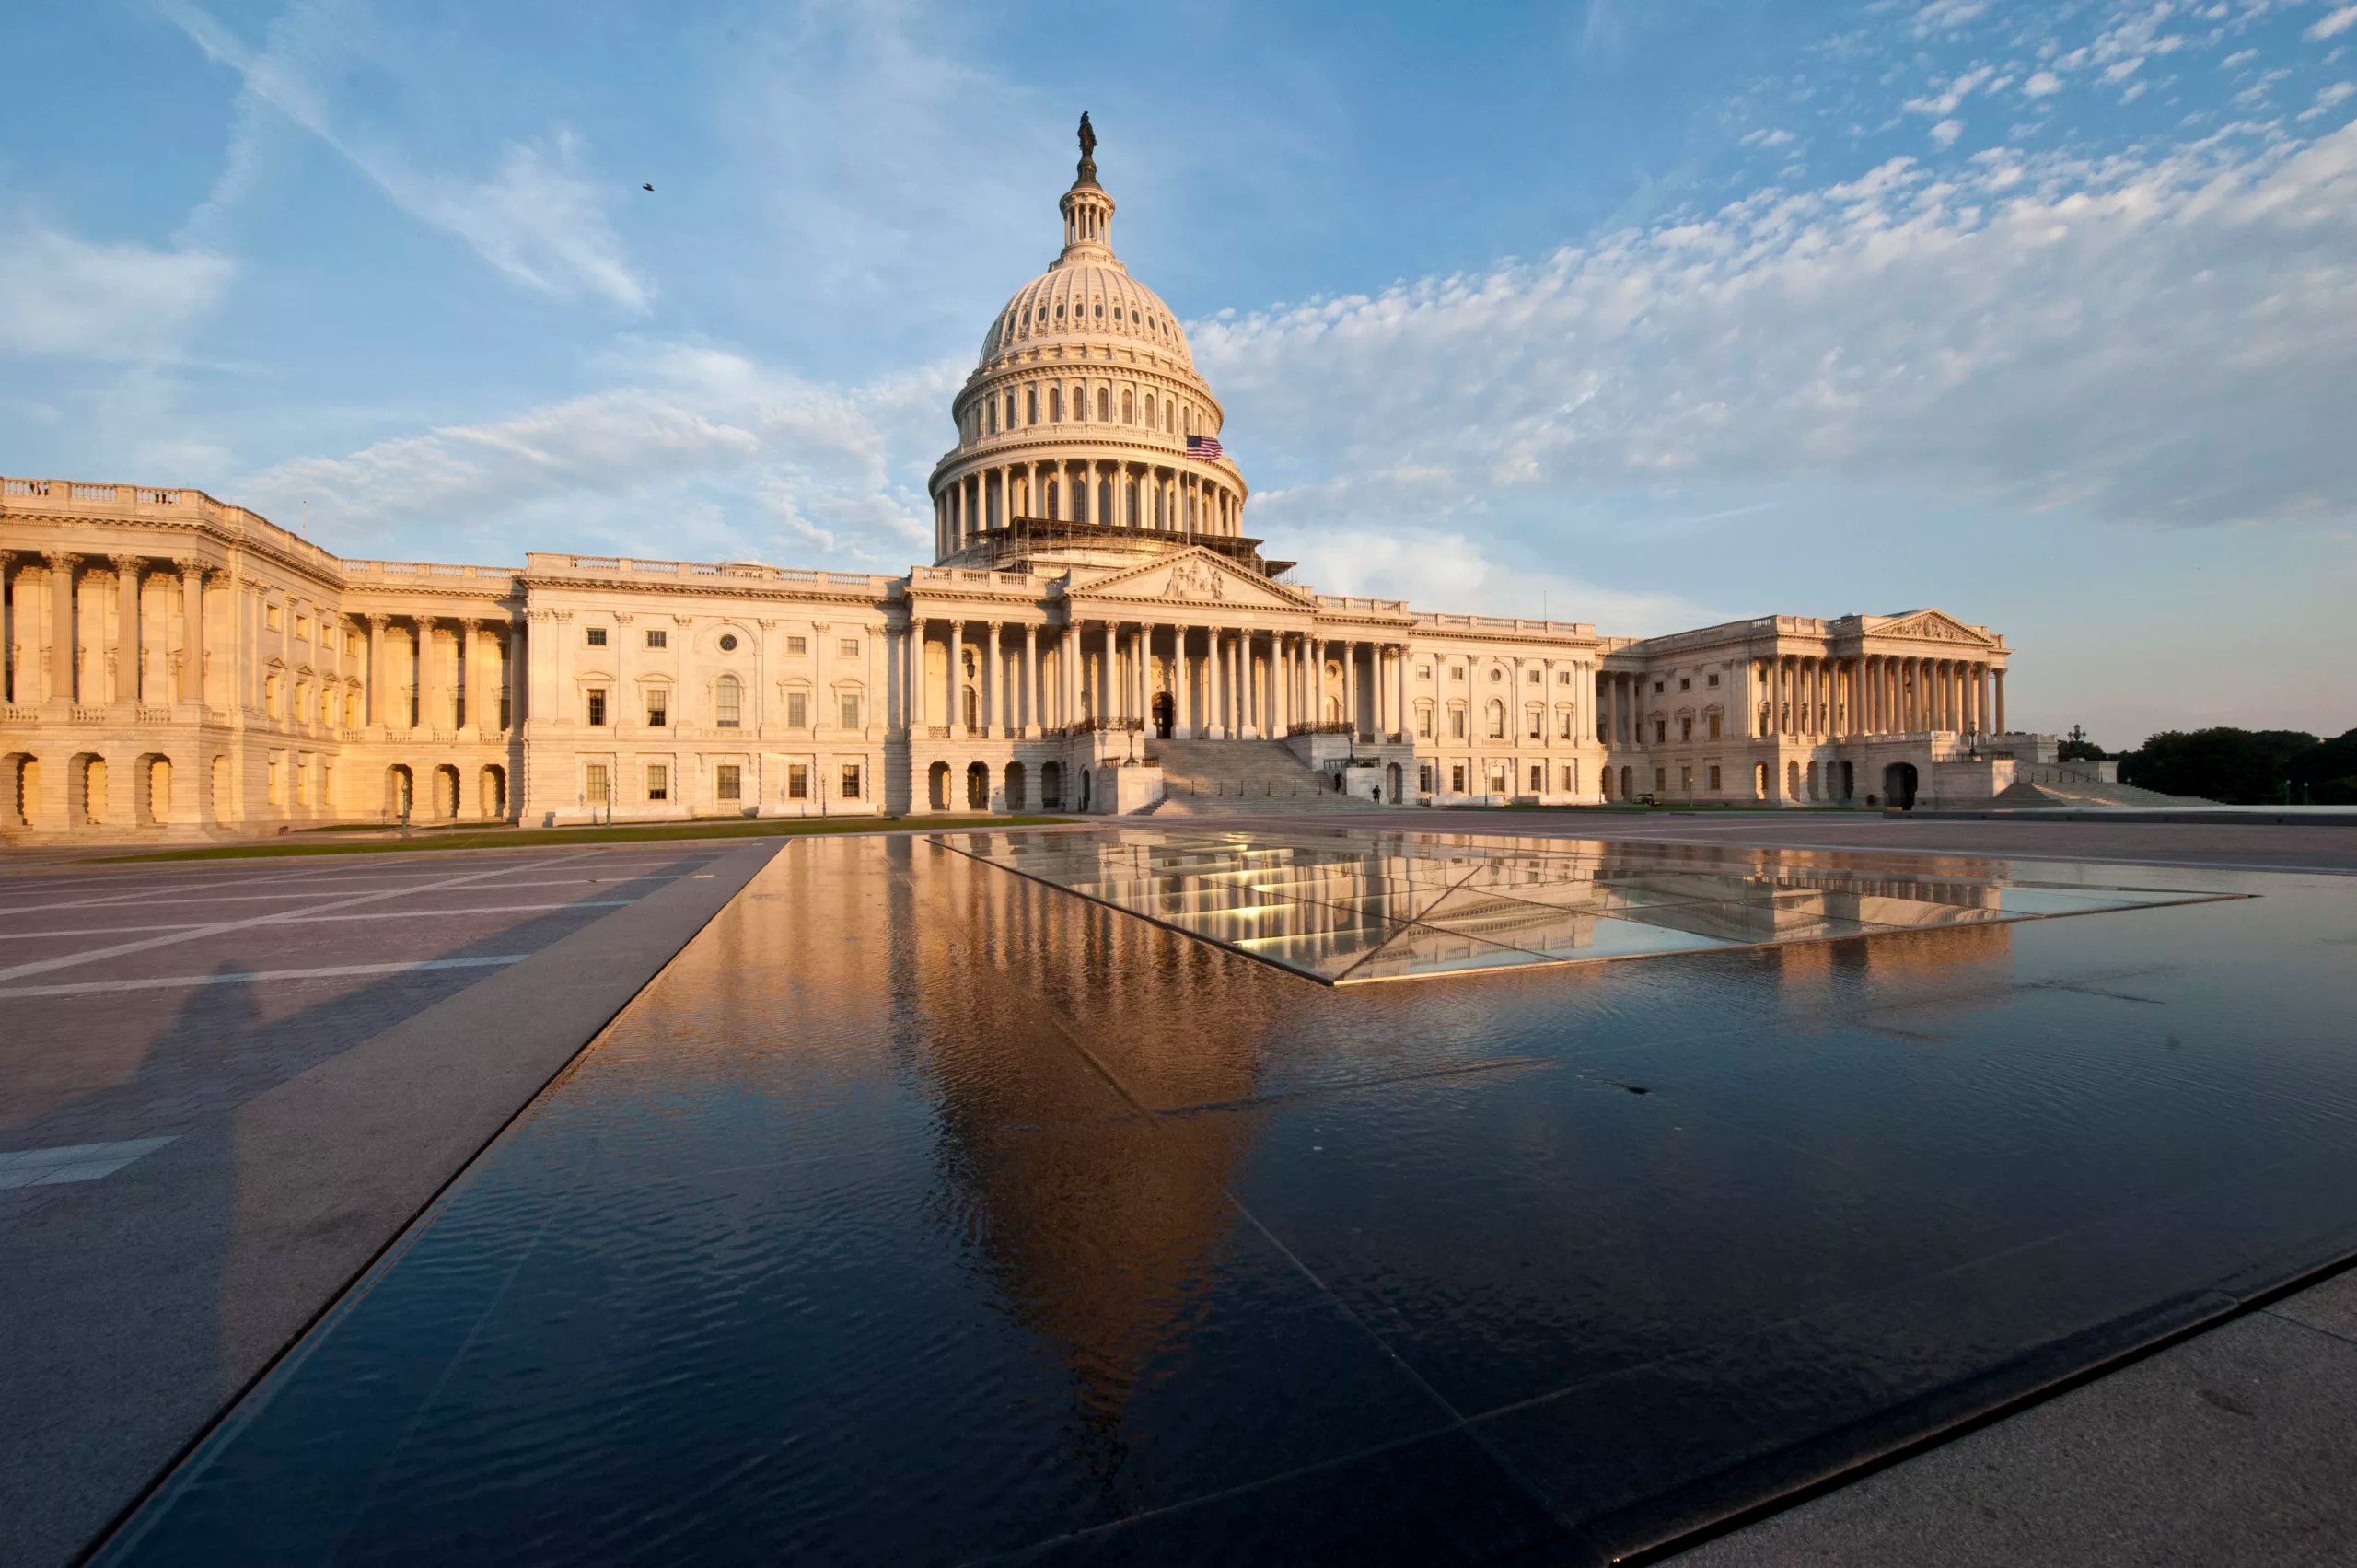 Exterior view of the U.S. Capitol Building.